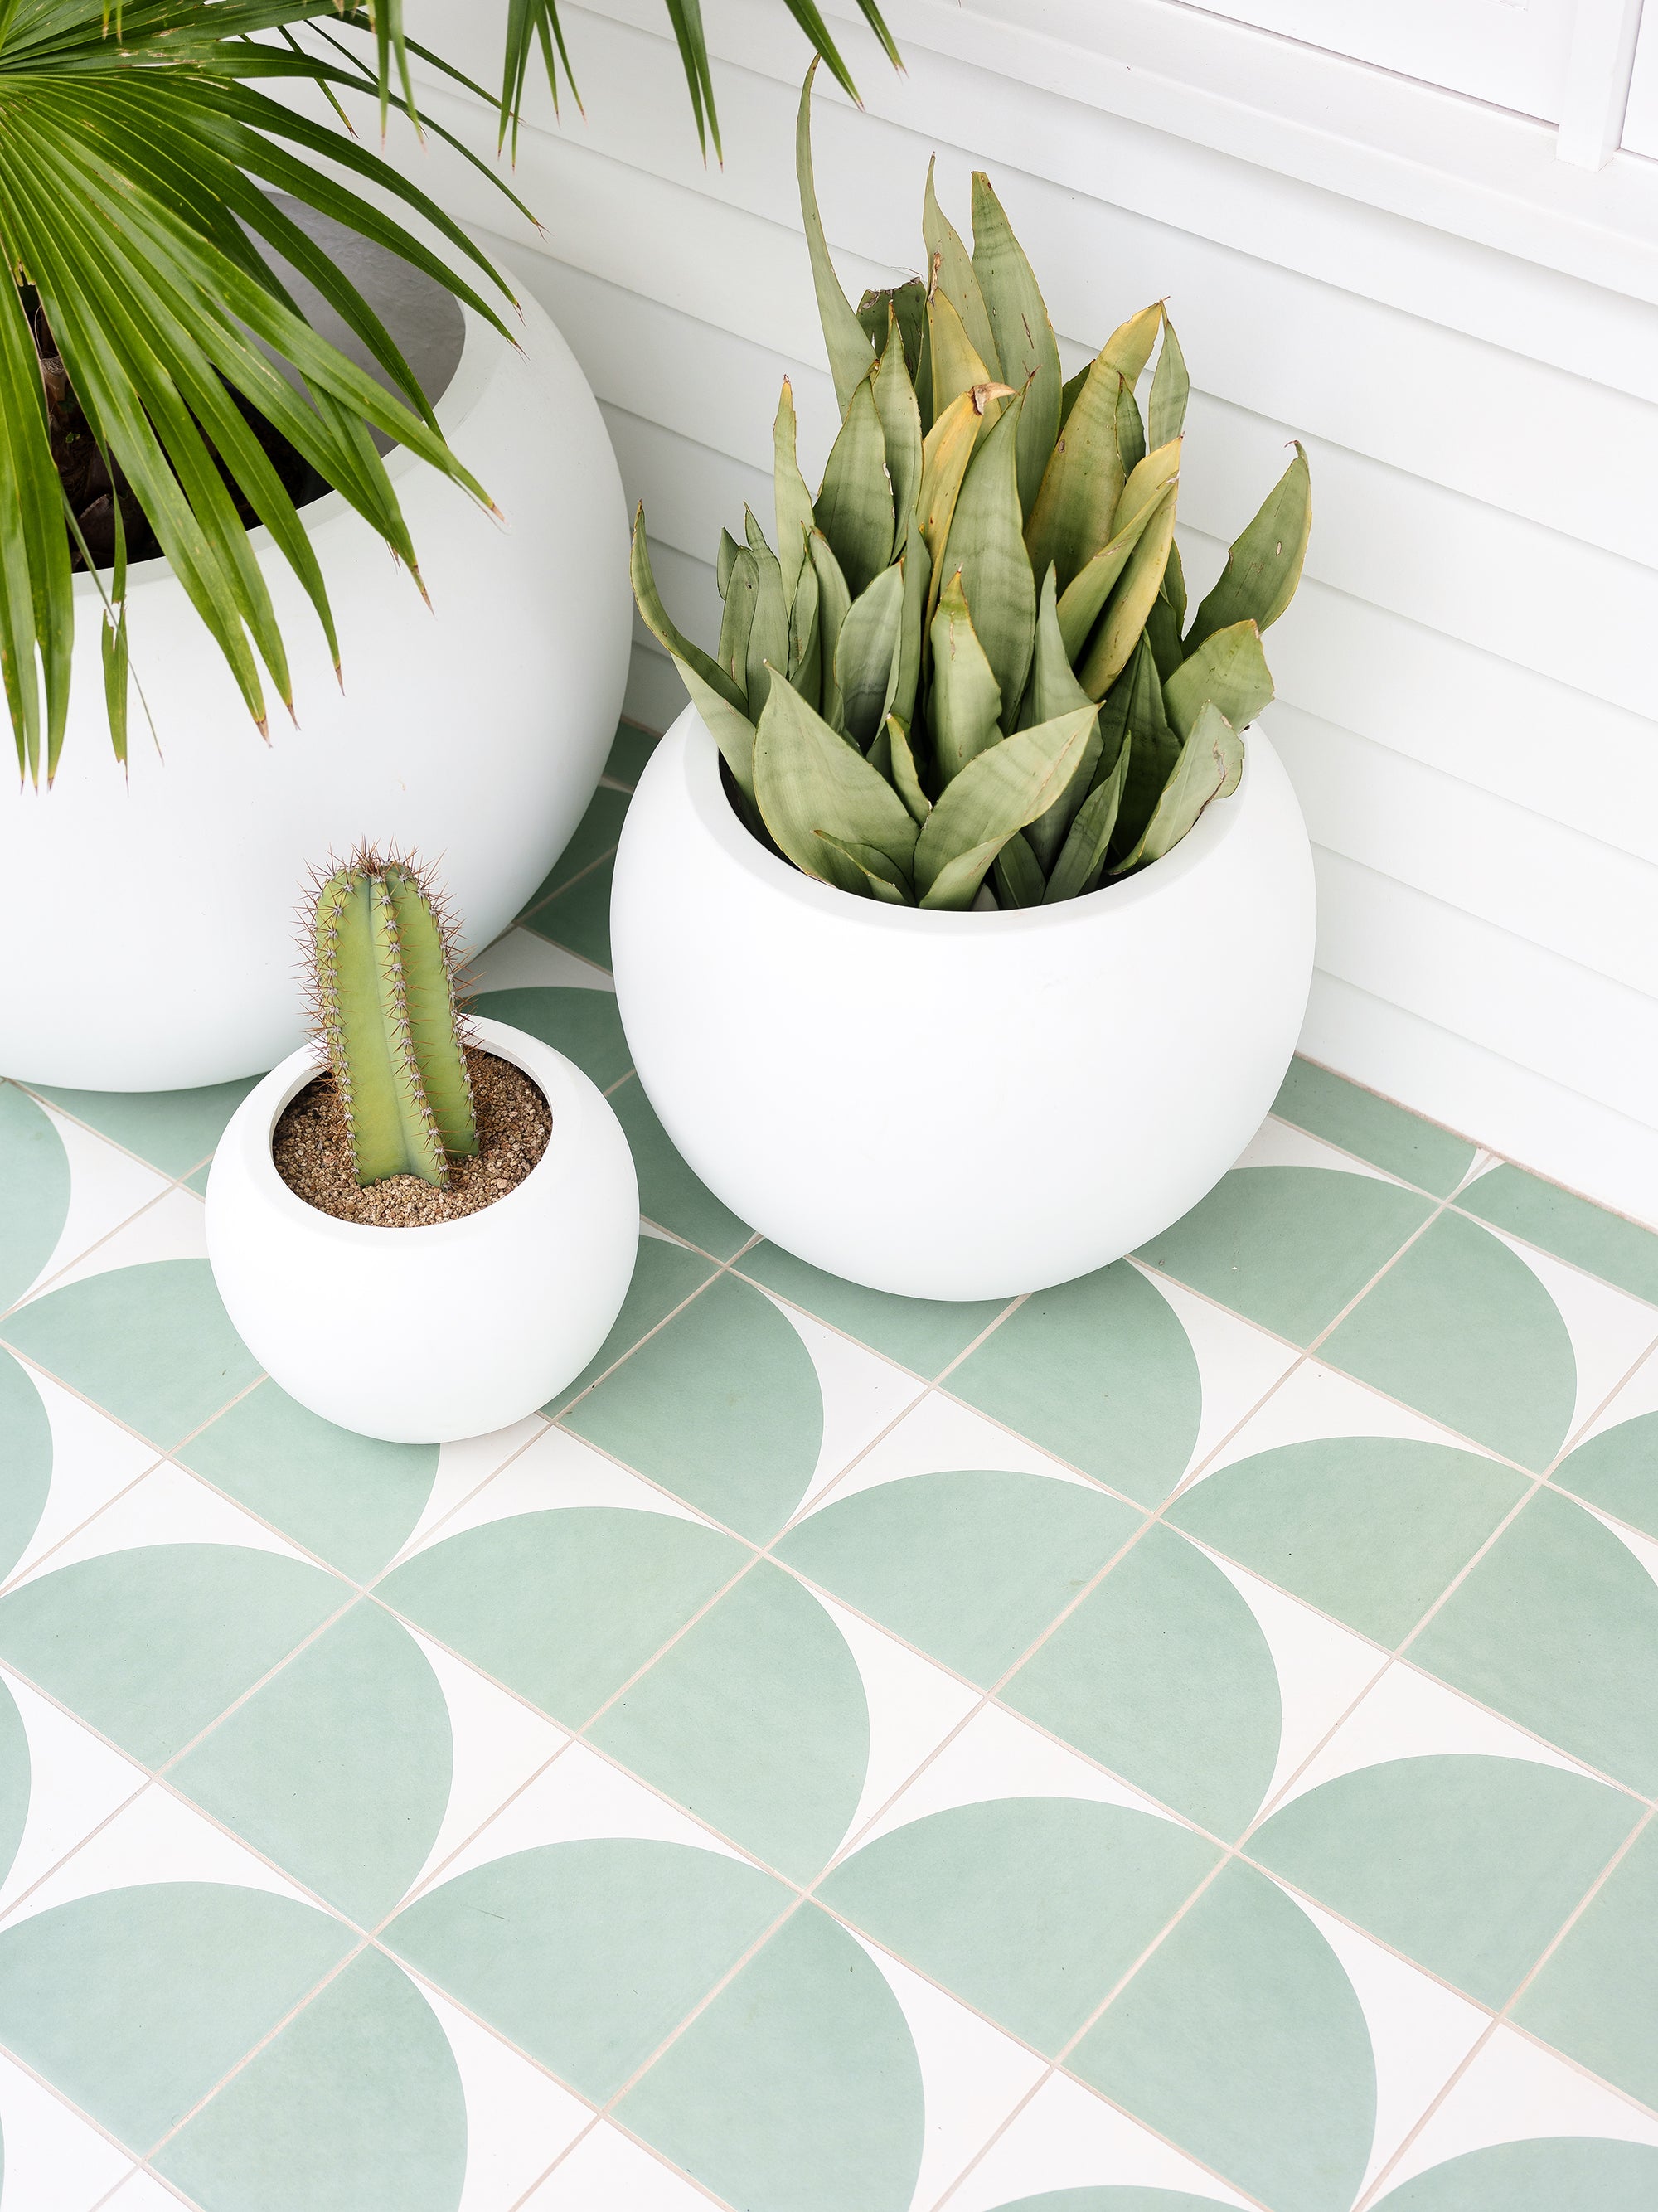 Encaustic green retro tiles on a front porch with cacti and plants in white round pots